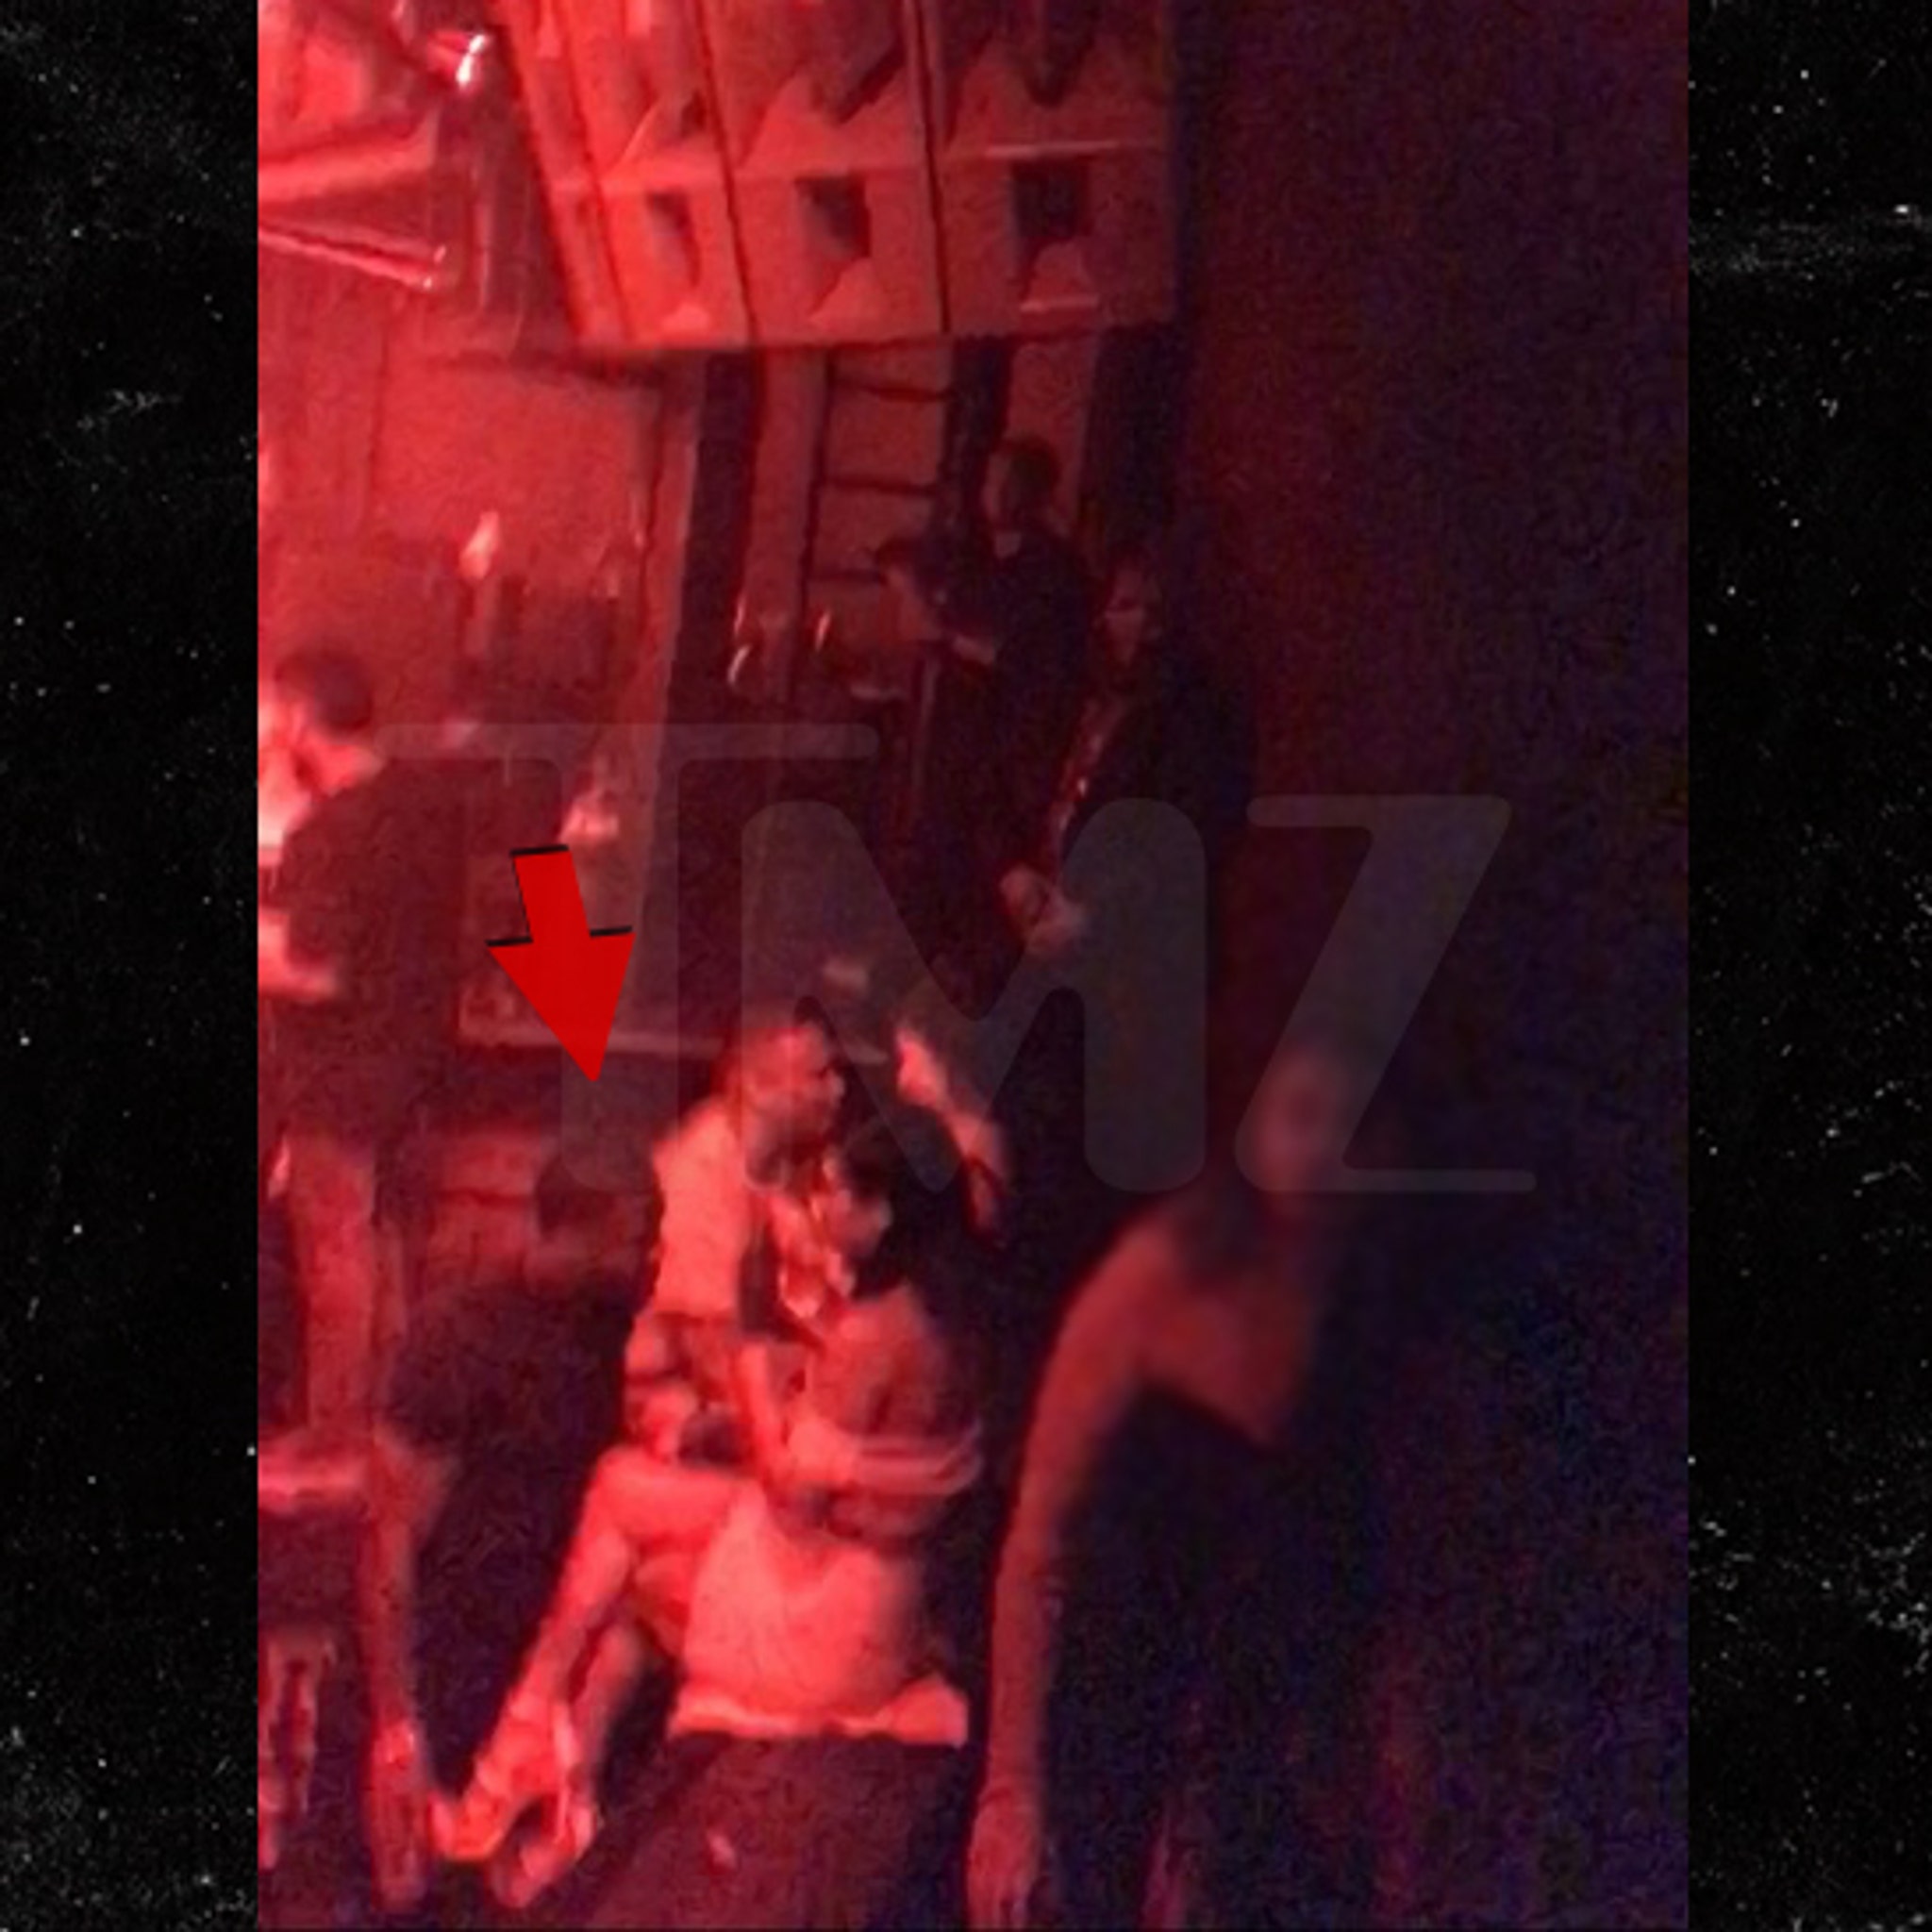 Kevin Hart Parties with Woman in Sex Video During Wild Vegas Weekend pic